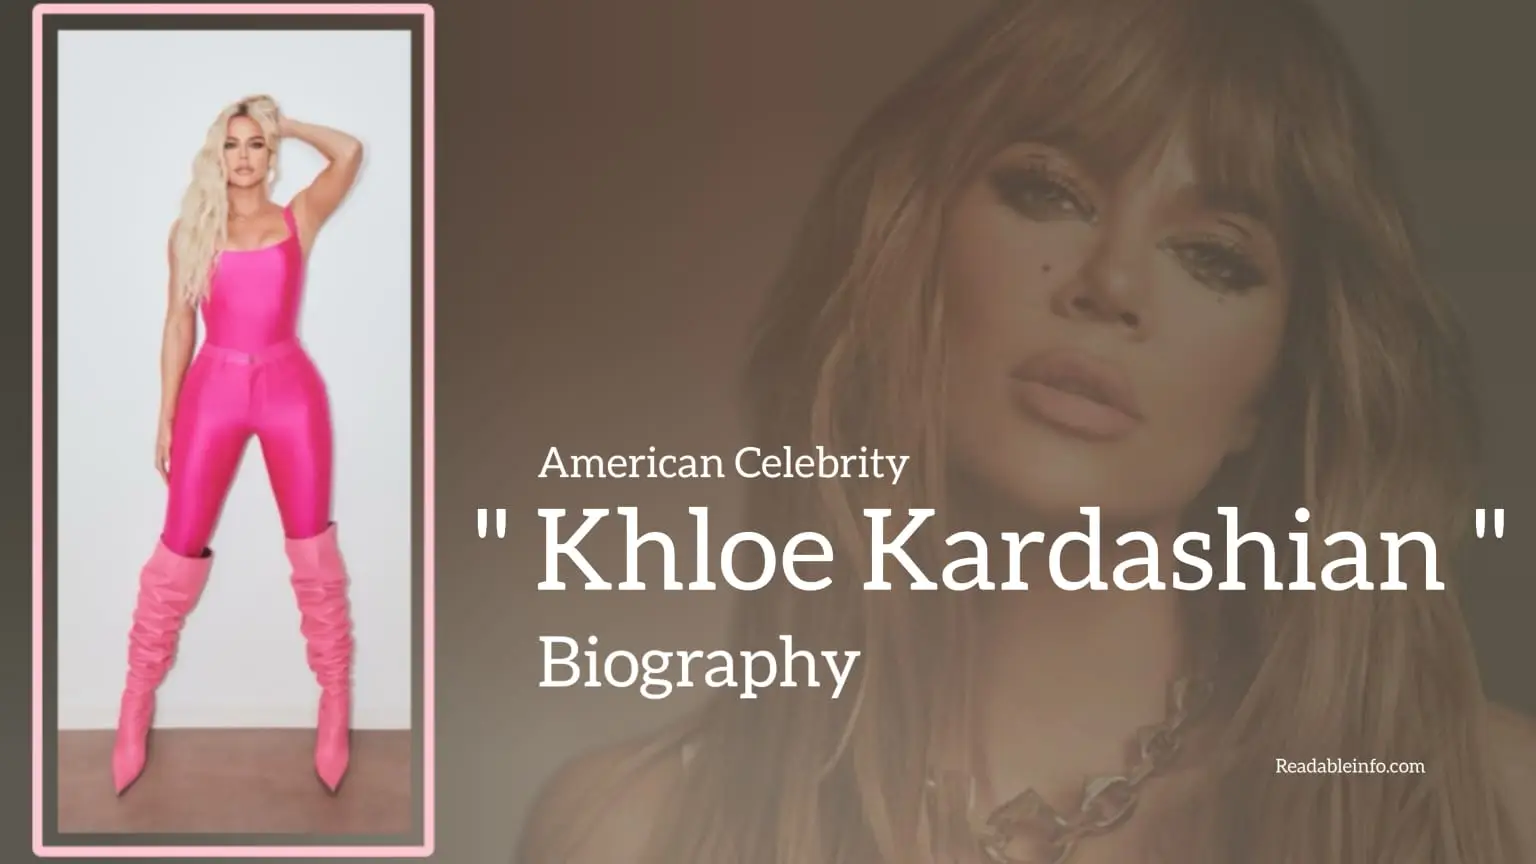 You are currently viewing Khloe Kardashian Biography (American Celebrity)